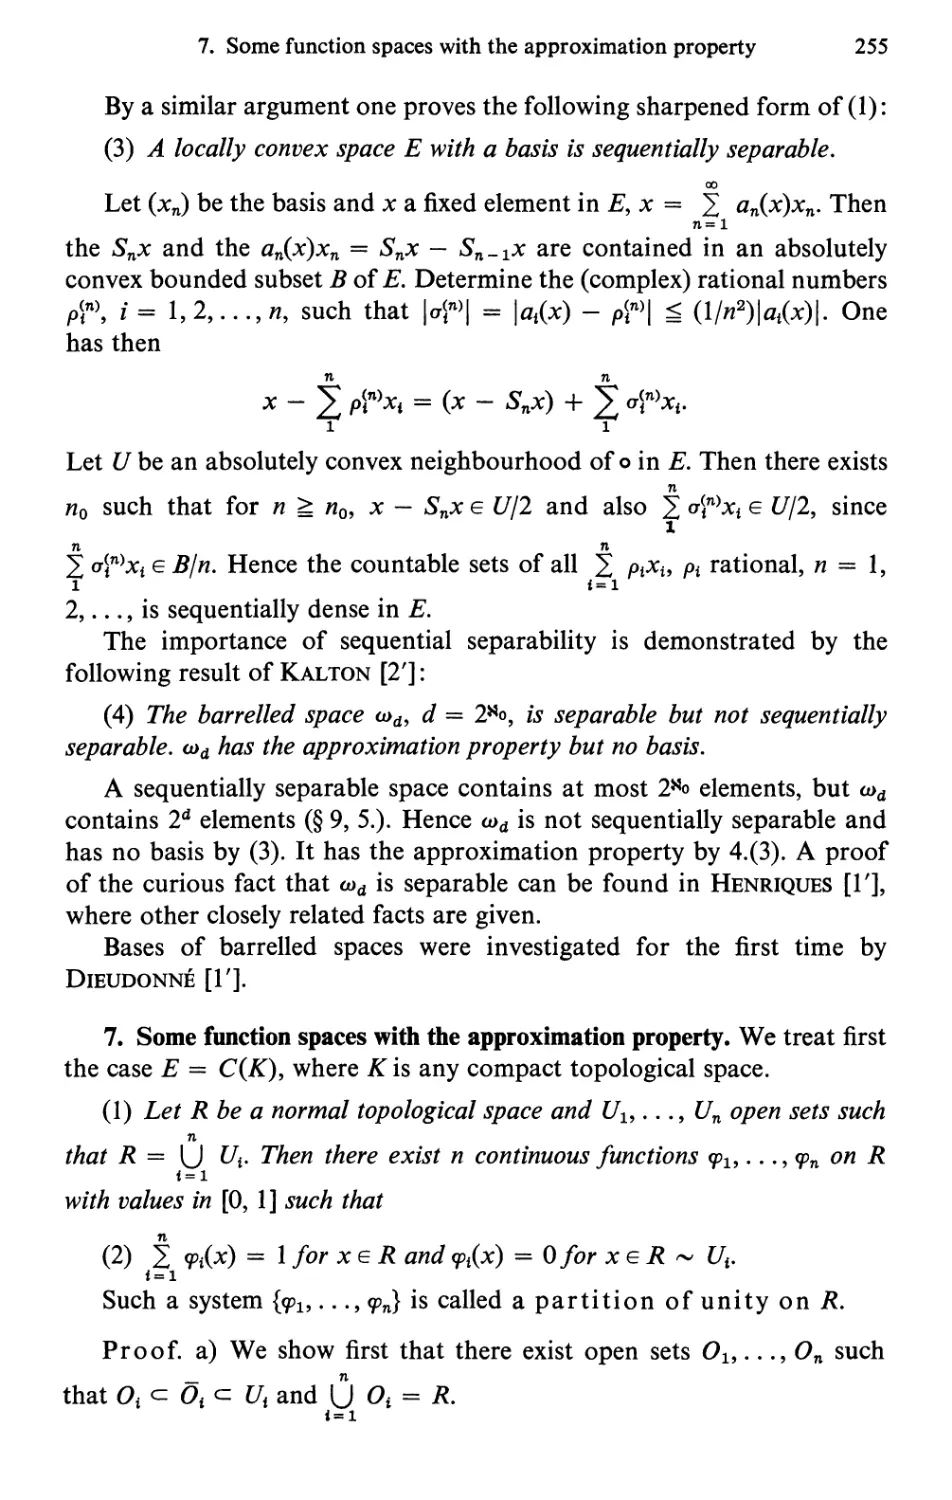 7. Some function spaces with the approximation property